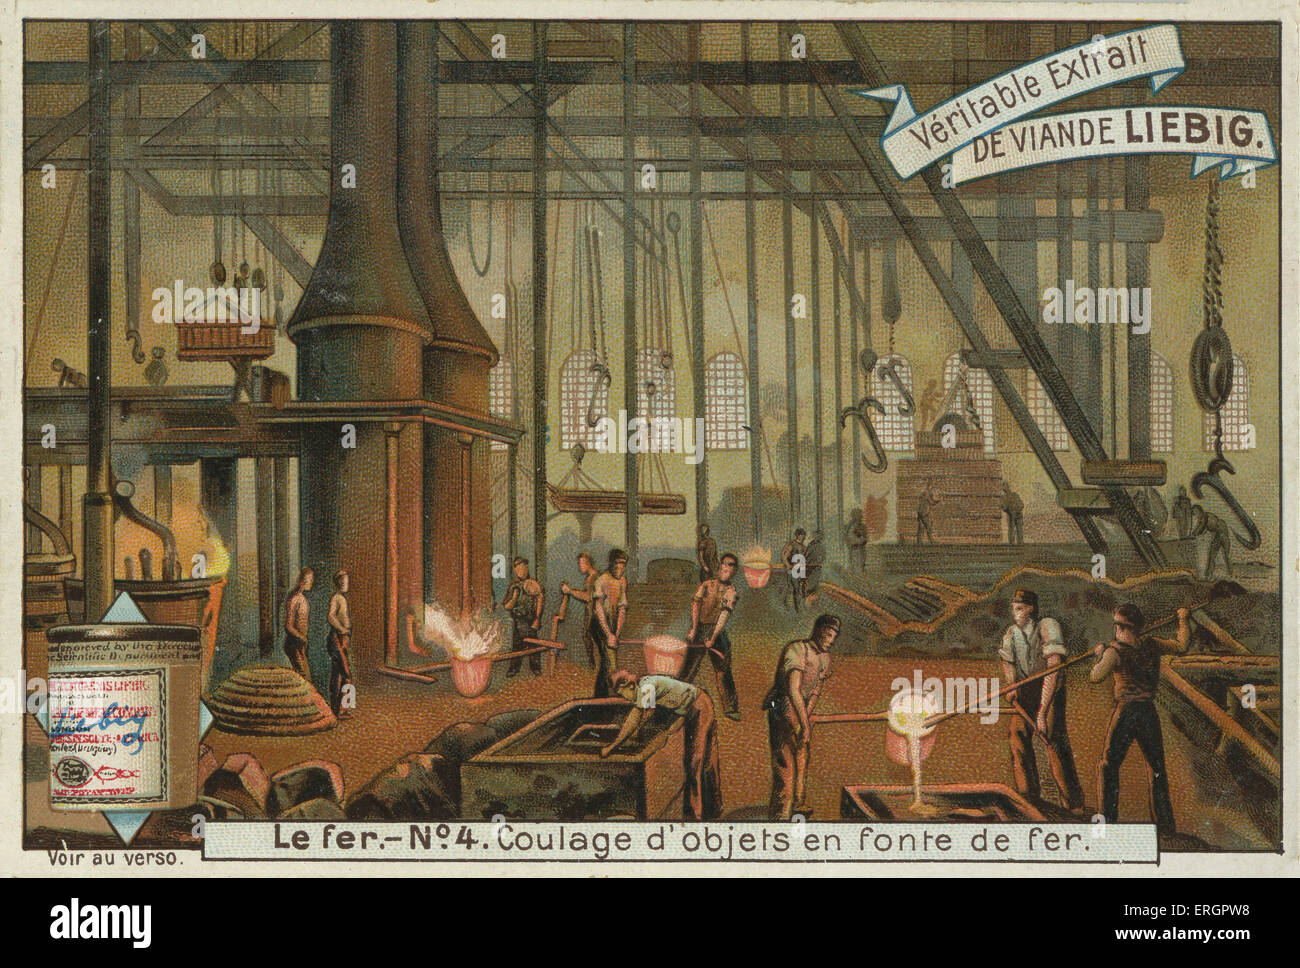 Casting iron objects, ironworks scene. Workers pour liquid iron into moulds. From a recipe card for Liebig 's Extract of Meat. Stock Photo